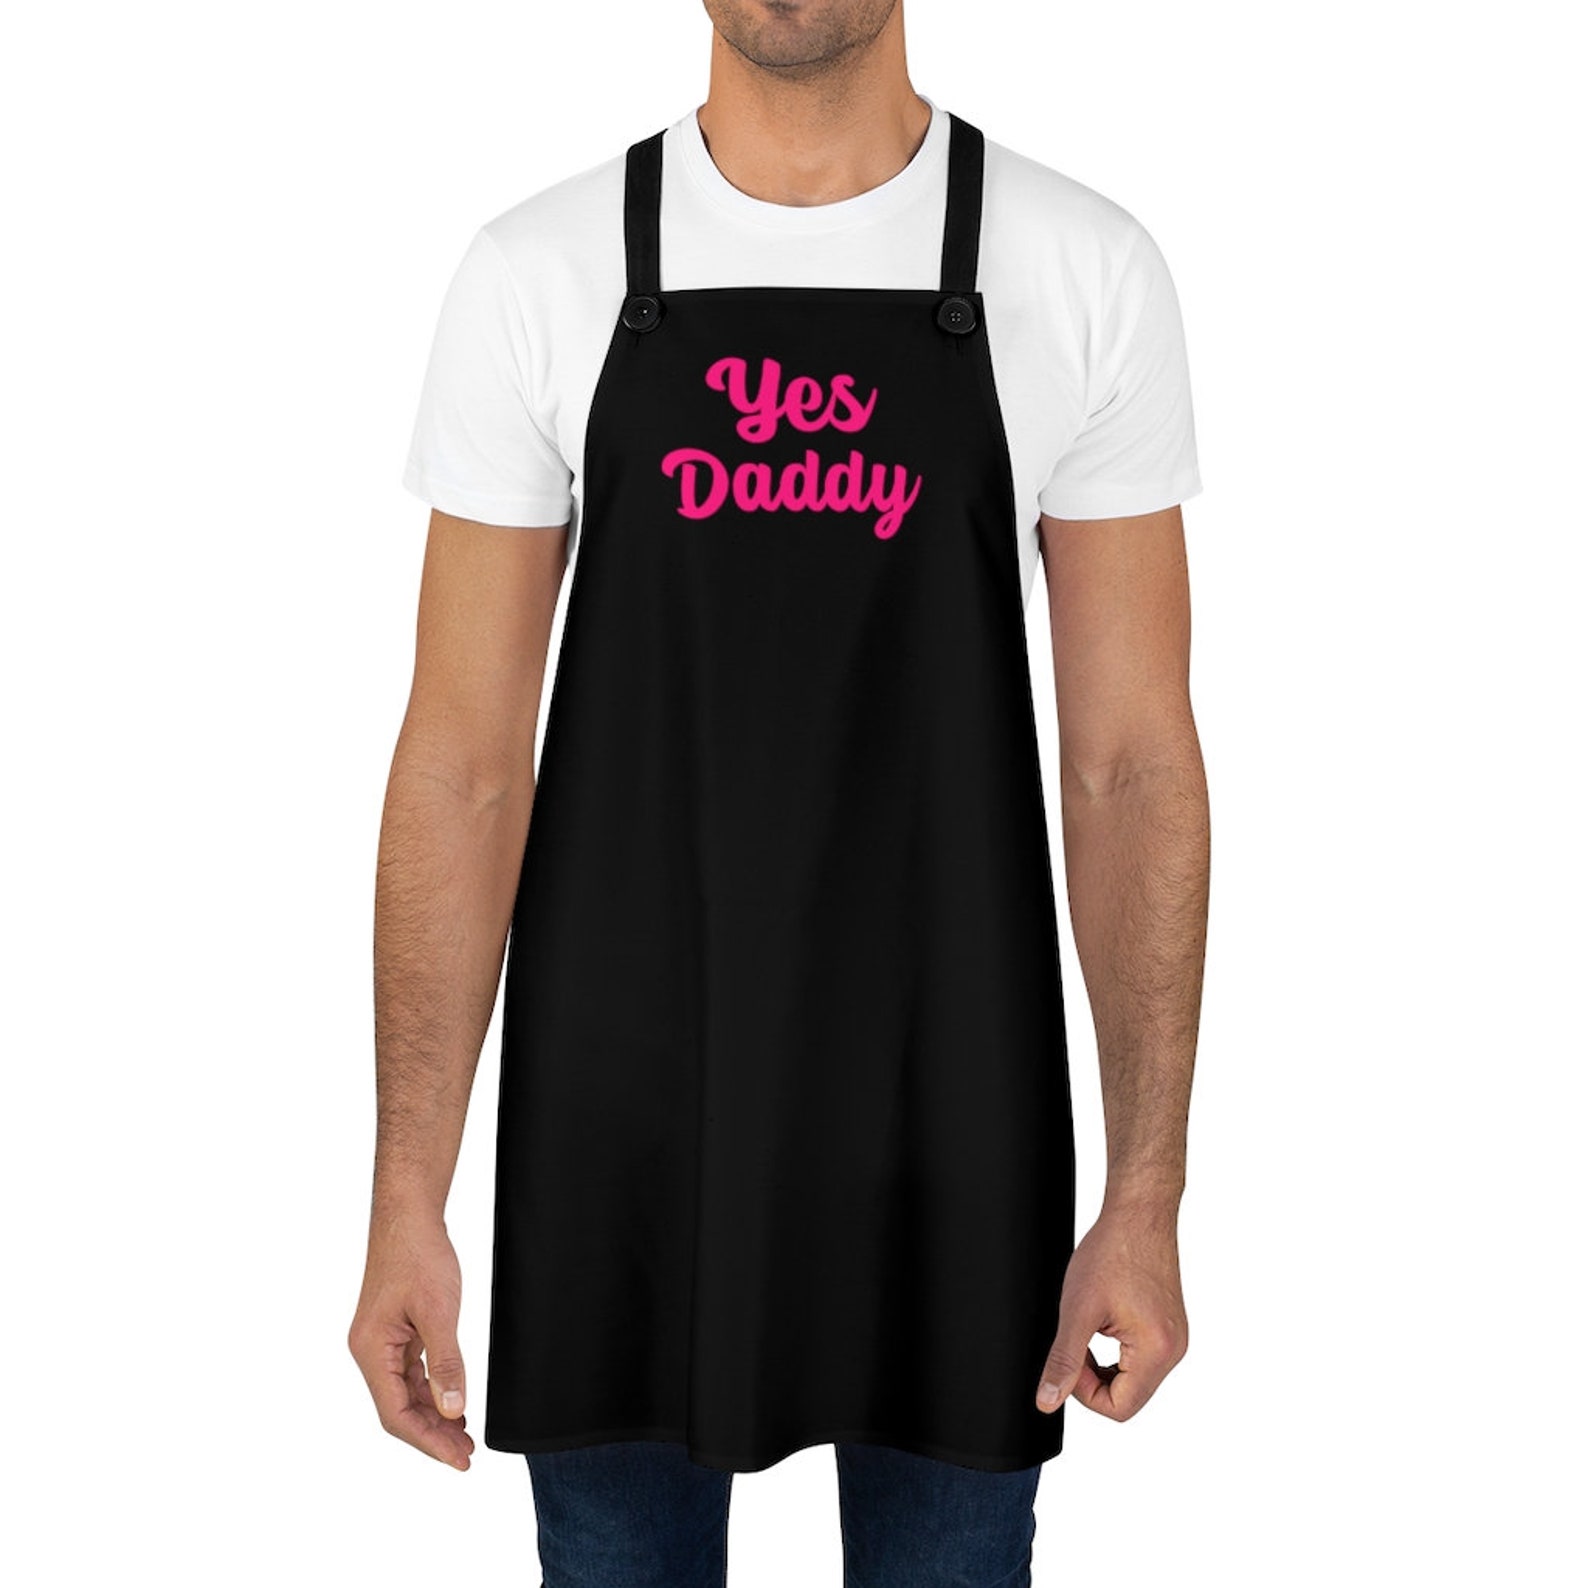 Yes Daddy Apron Bdsm T Bdsm Quotes Ddlg Dom Submissive Etsy Uk